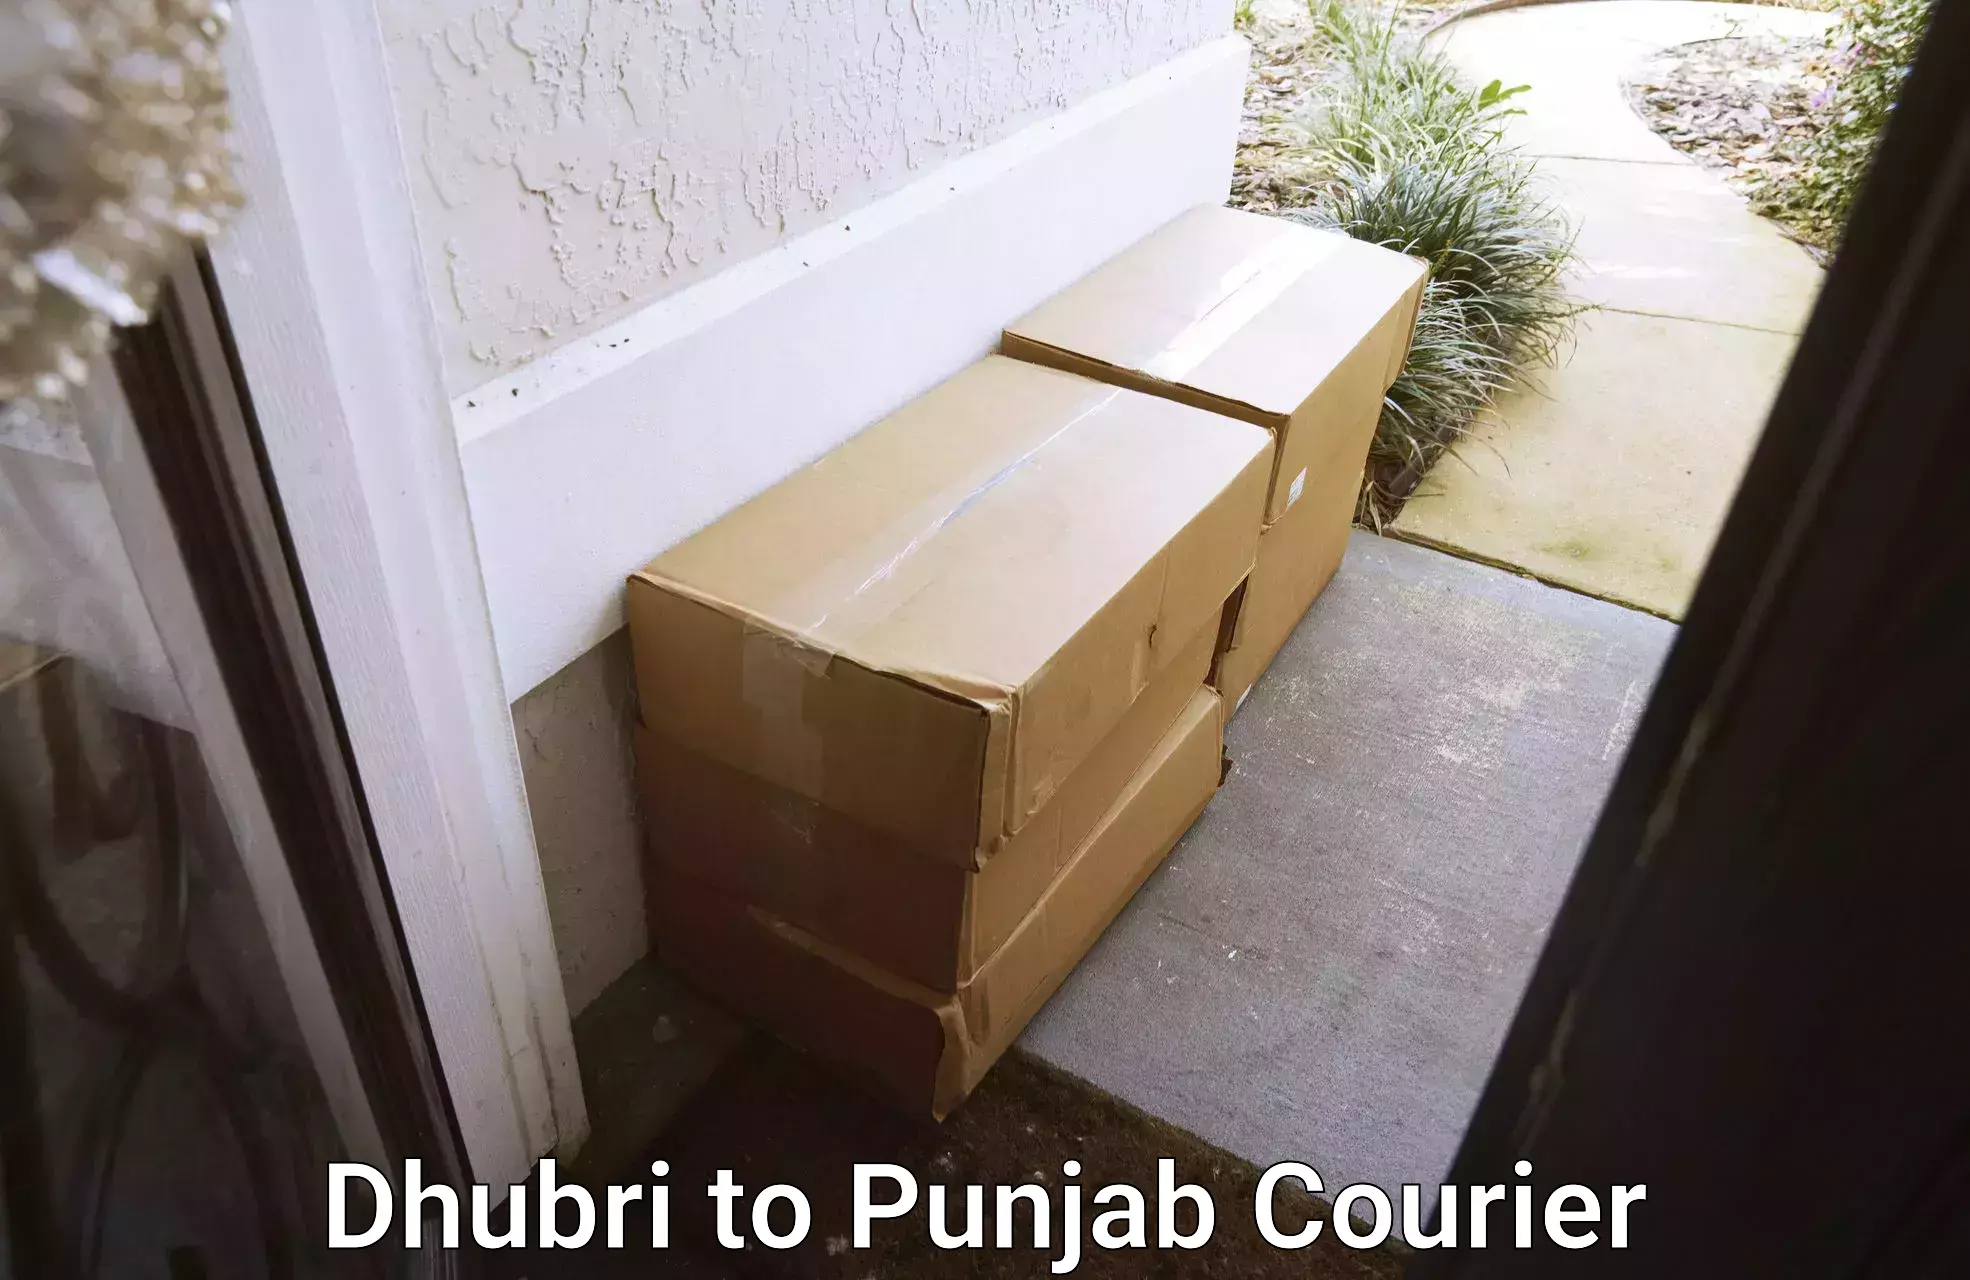 Efficient package consolidation Dhubri to Bathinda